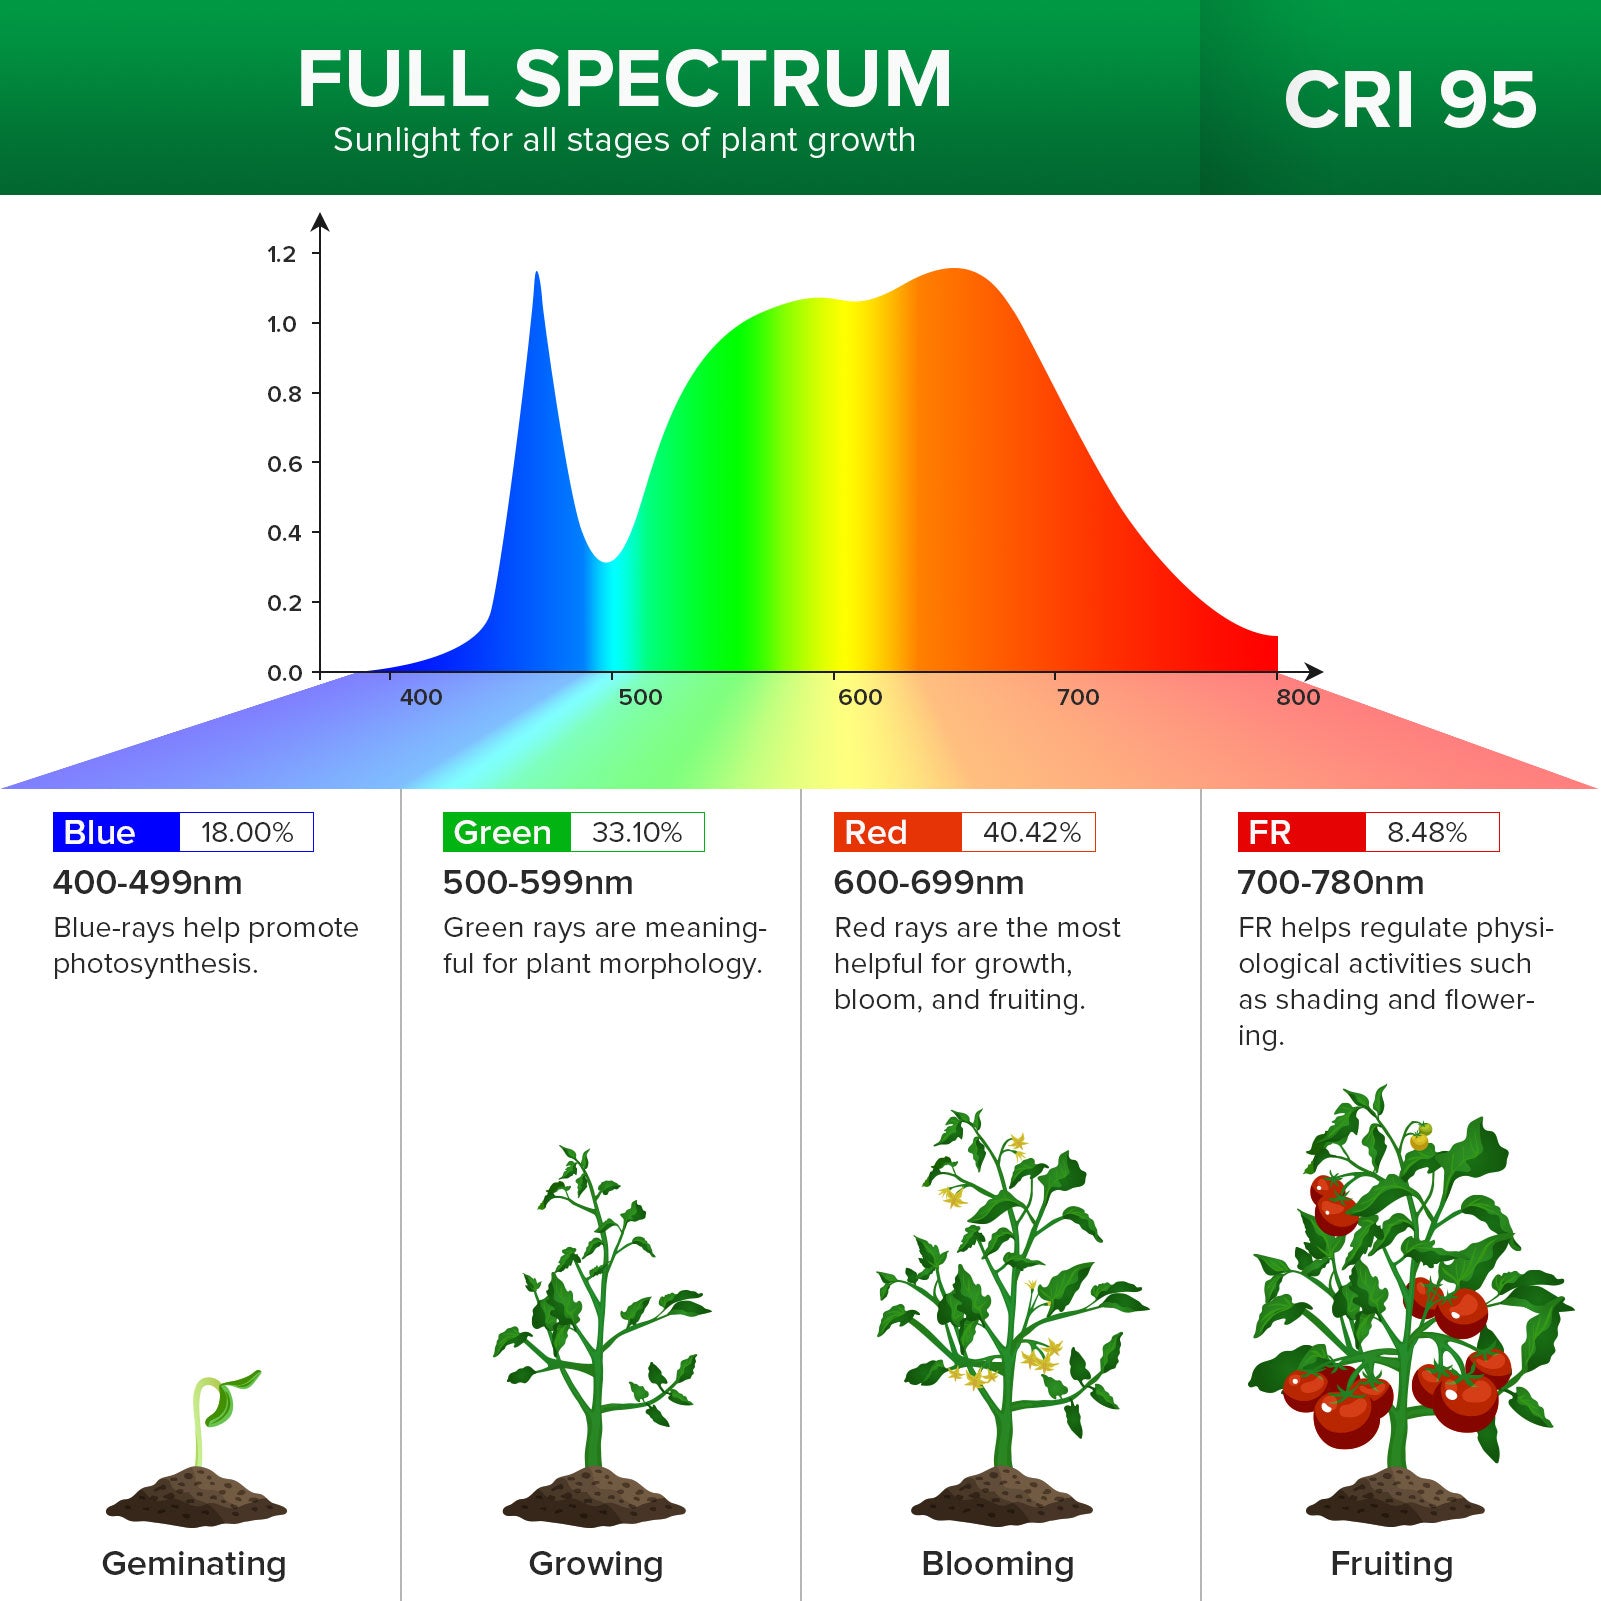 Adjustable Multi-Head Clip-on Grow Light is full spectrum，sunlight for all stages of plant growth，CRI 95.